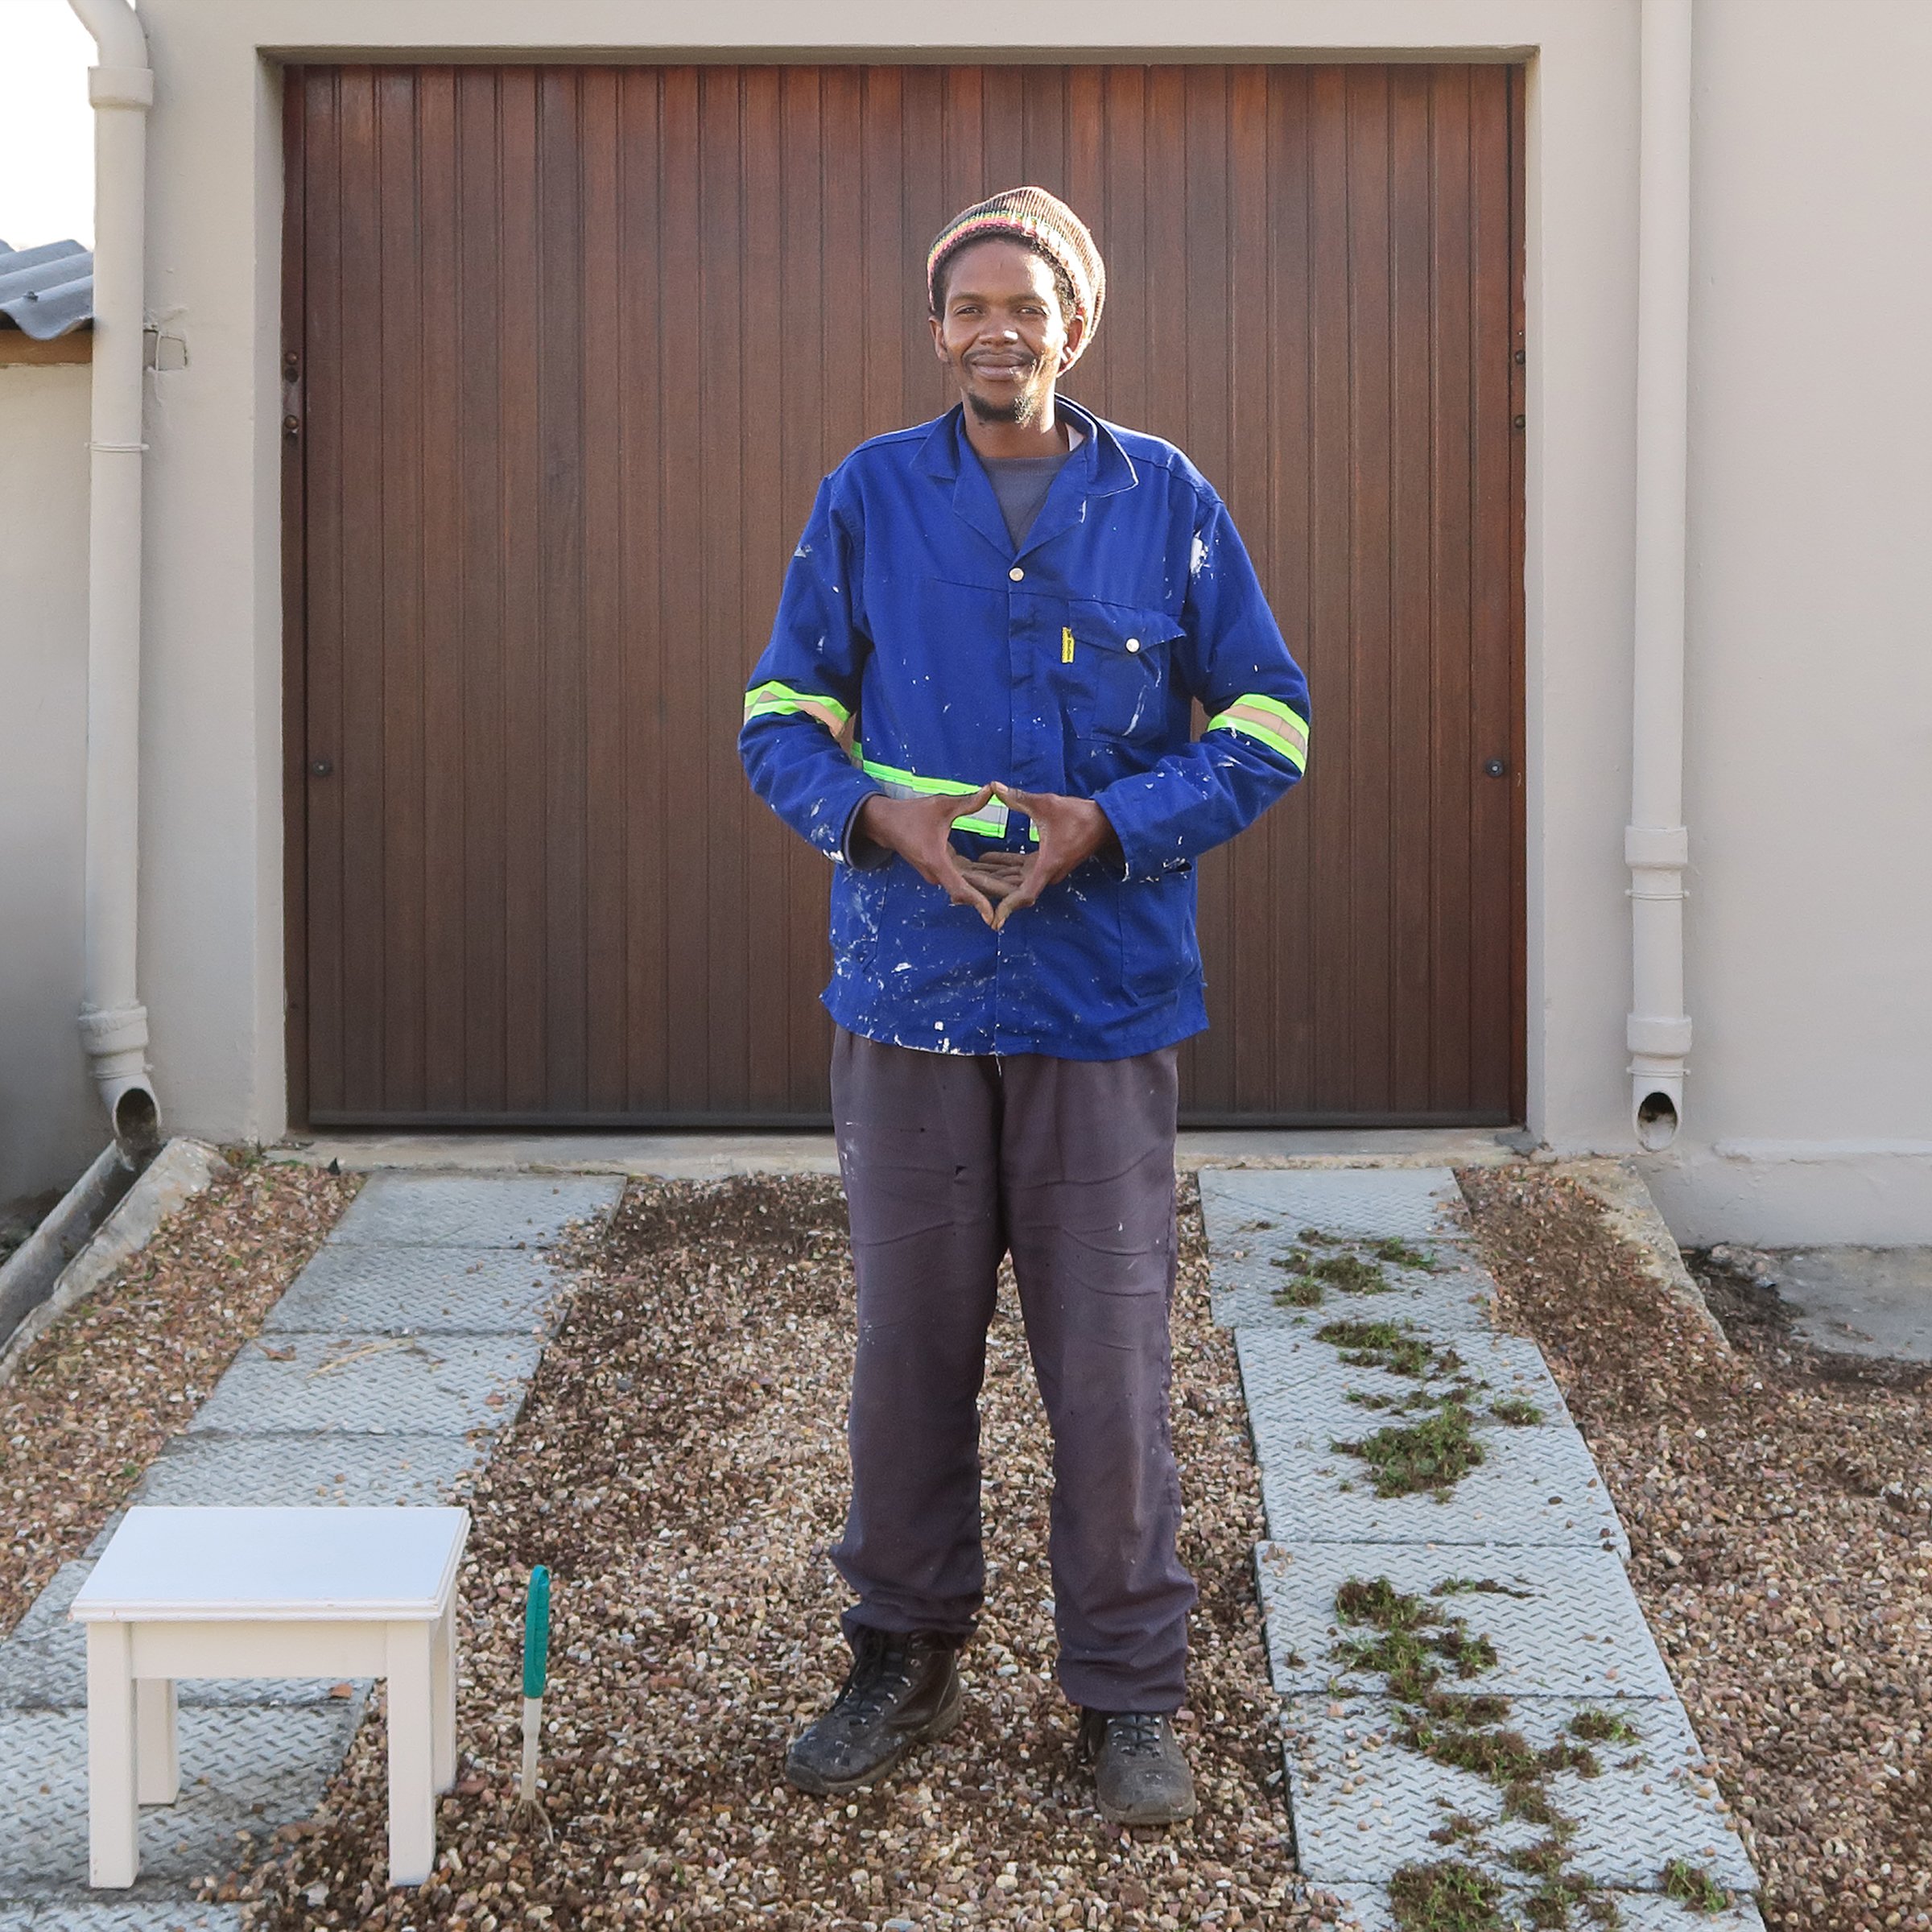 Worker, Cape Town, South Africa.jpg